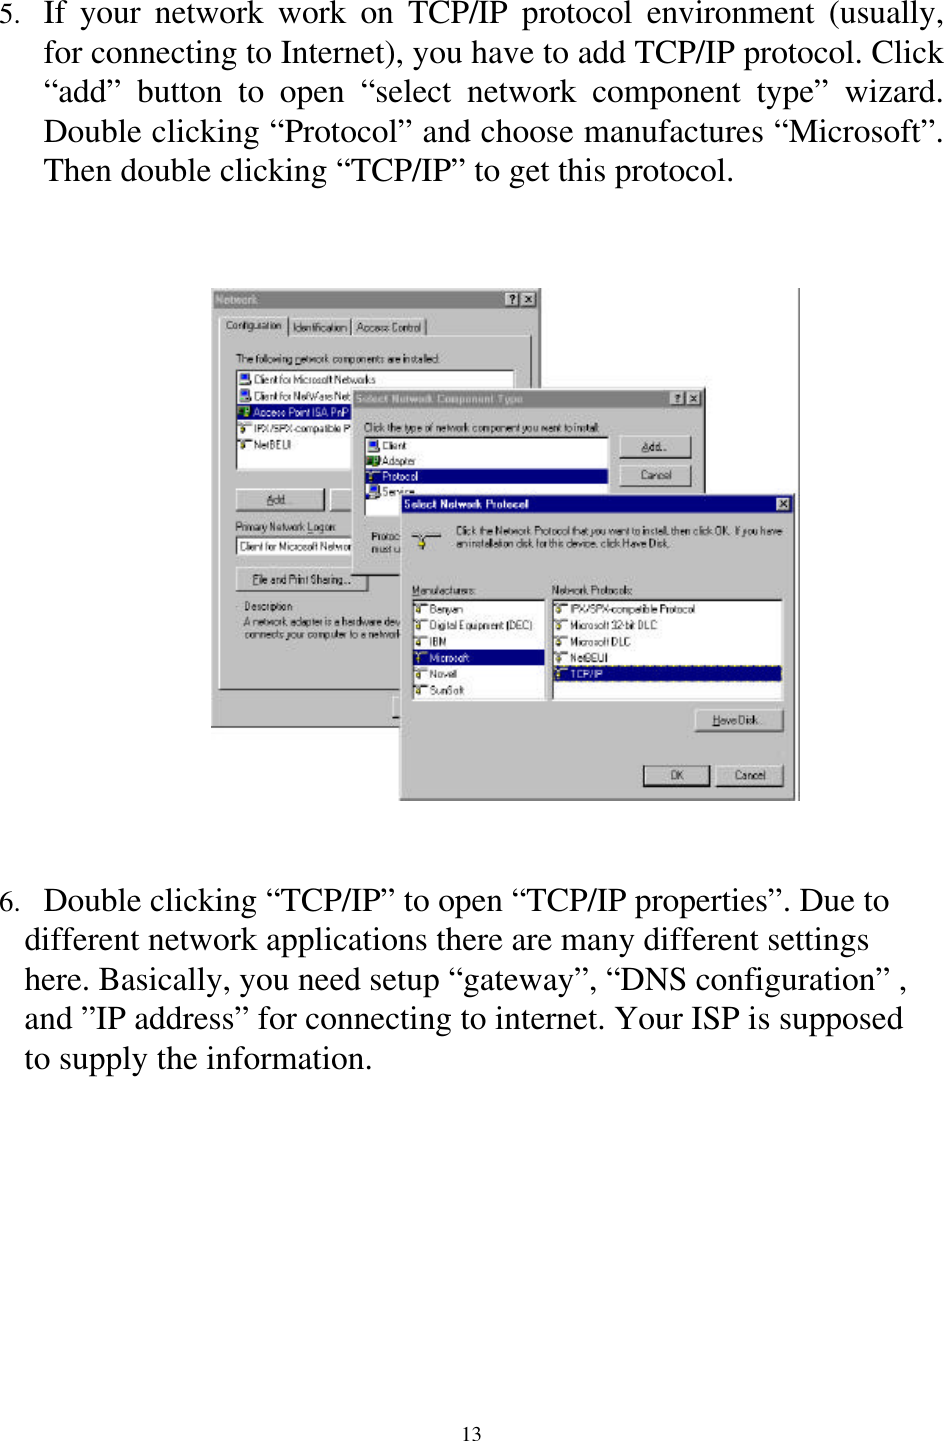 135.  If your network work on TCP/IP protocol environment (usually,for connecting to Internet), you have to add TCP/IP protocol. Click“add” button to open “select network component type” wizard.Double clicking “Protocol” and choose manufactures “Microsoft”.Then double clicking “TCP/IP” to get this protocol.6.  Double clicking “TCP/IP” to open “TCP/IP properties”. Due to   different network applications there are many different settings       here. Basically, you need setup “gateway”, “DNS configuration” ,   and ”IP address” for connecting to internet. Your ISP is supposed   to supply the information.